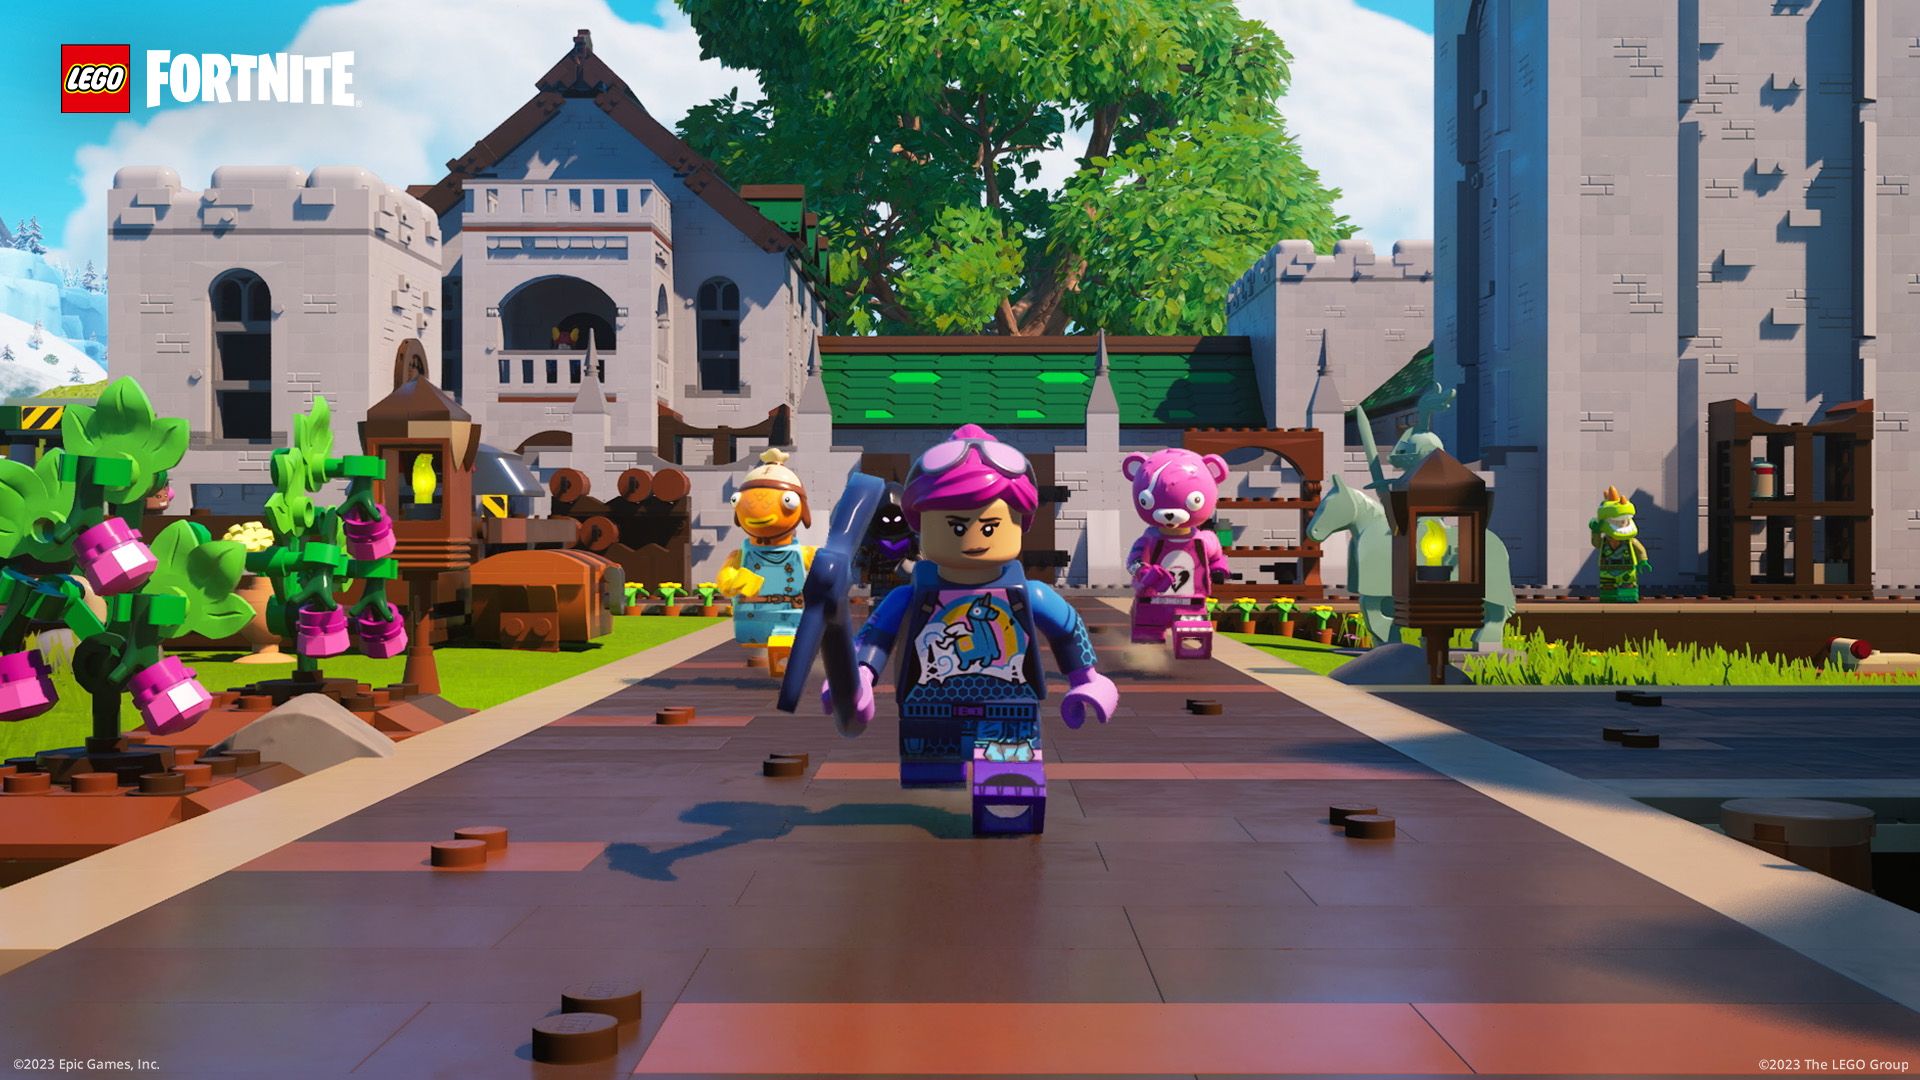 Epic adds Lego mode to Fortnite, putting action behind metaverse talk